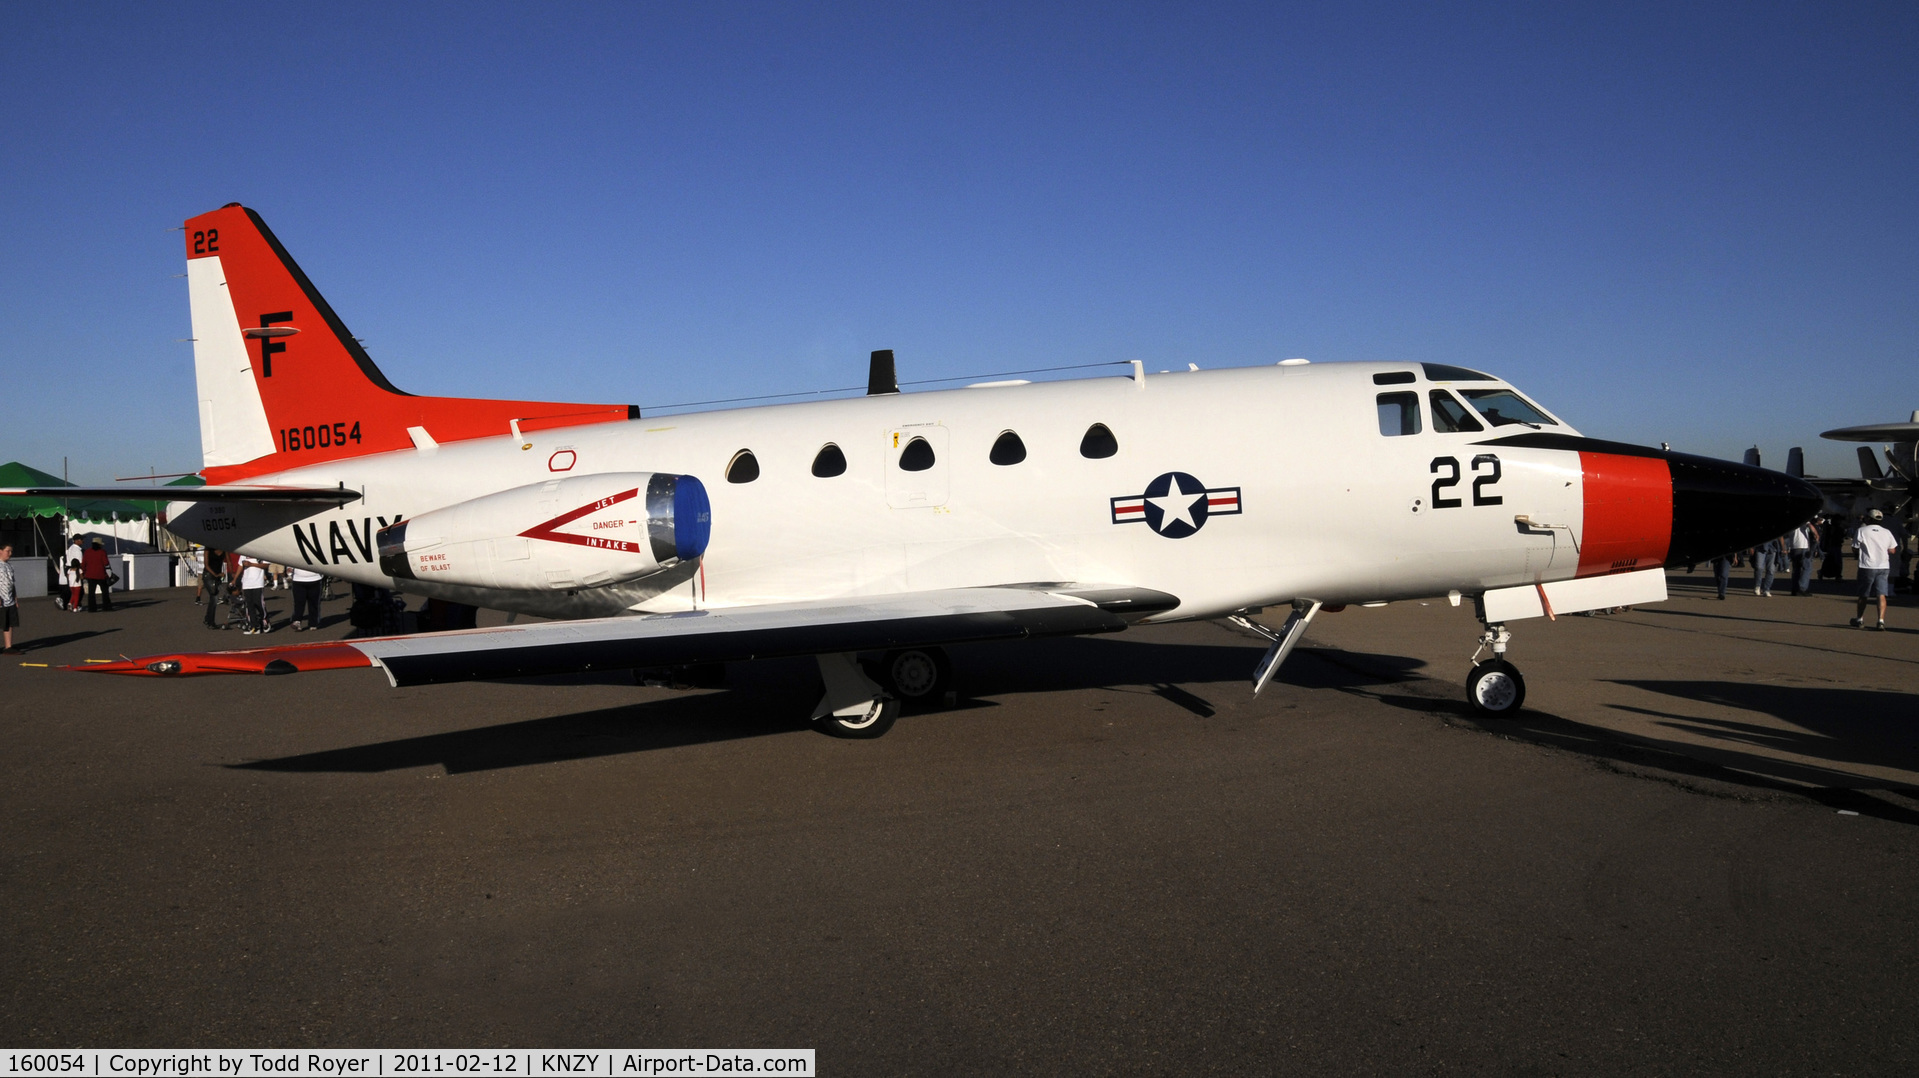 160054, North American Rockwell CT-39G Sabreliner C/N 306-104, Centennial of Naval Aviation